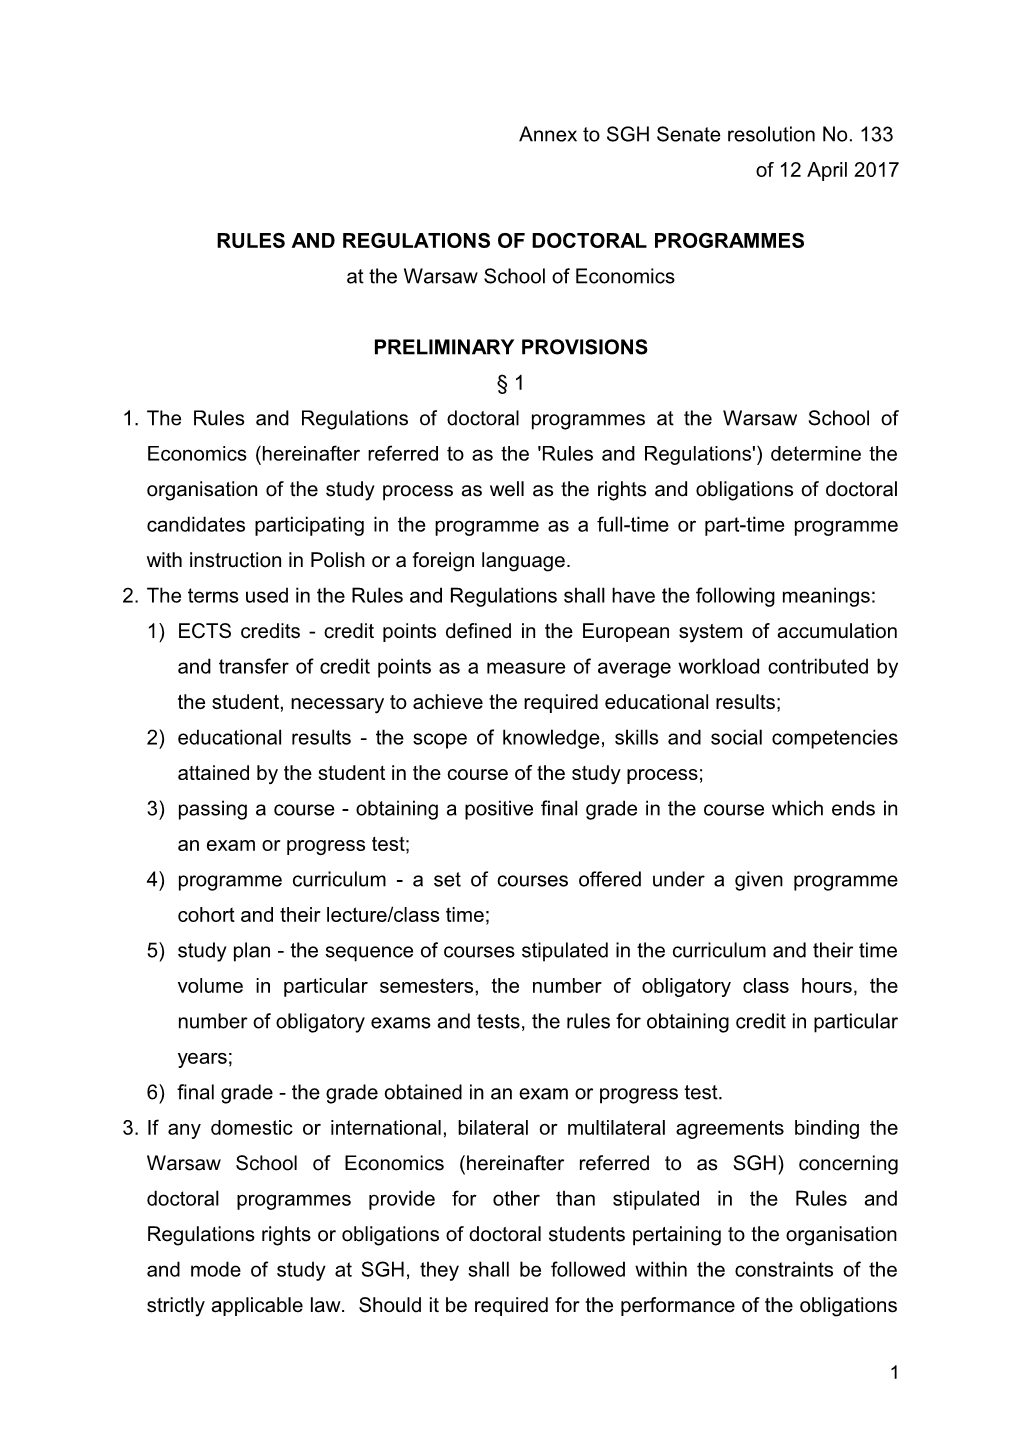 Rules and Regulations of Doctoral Programmes